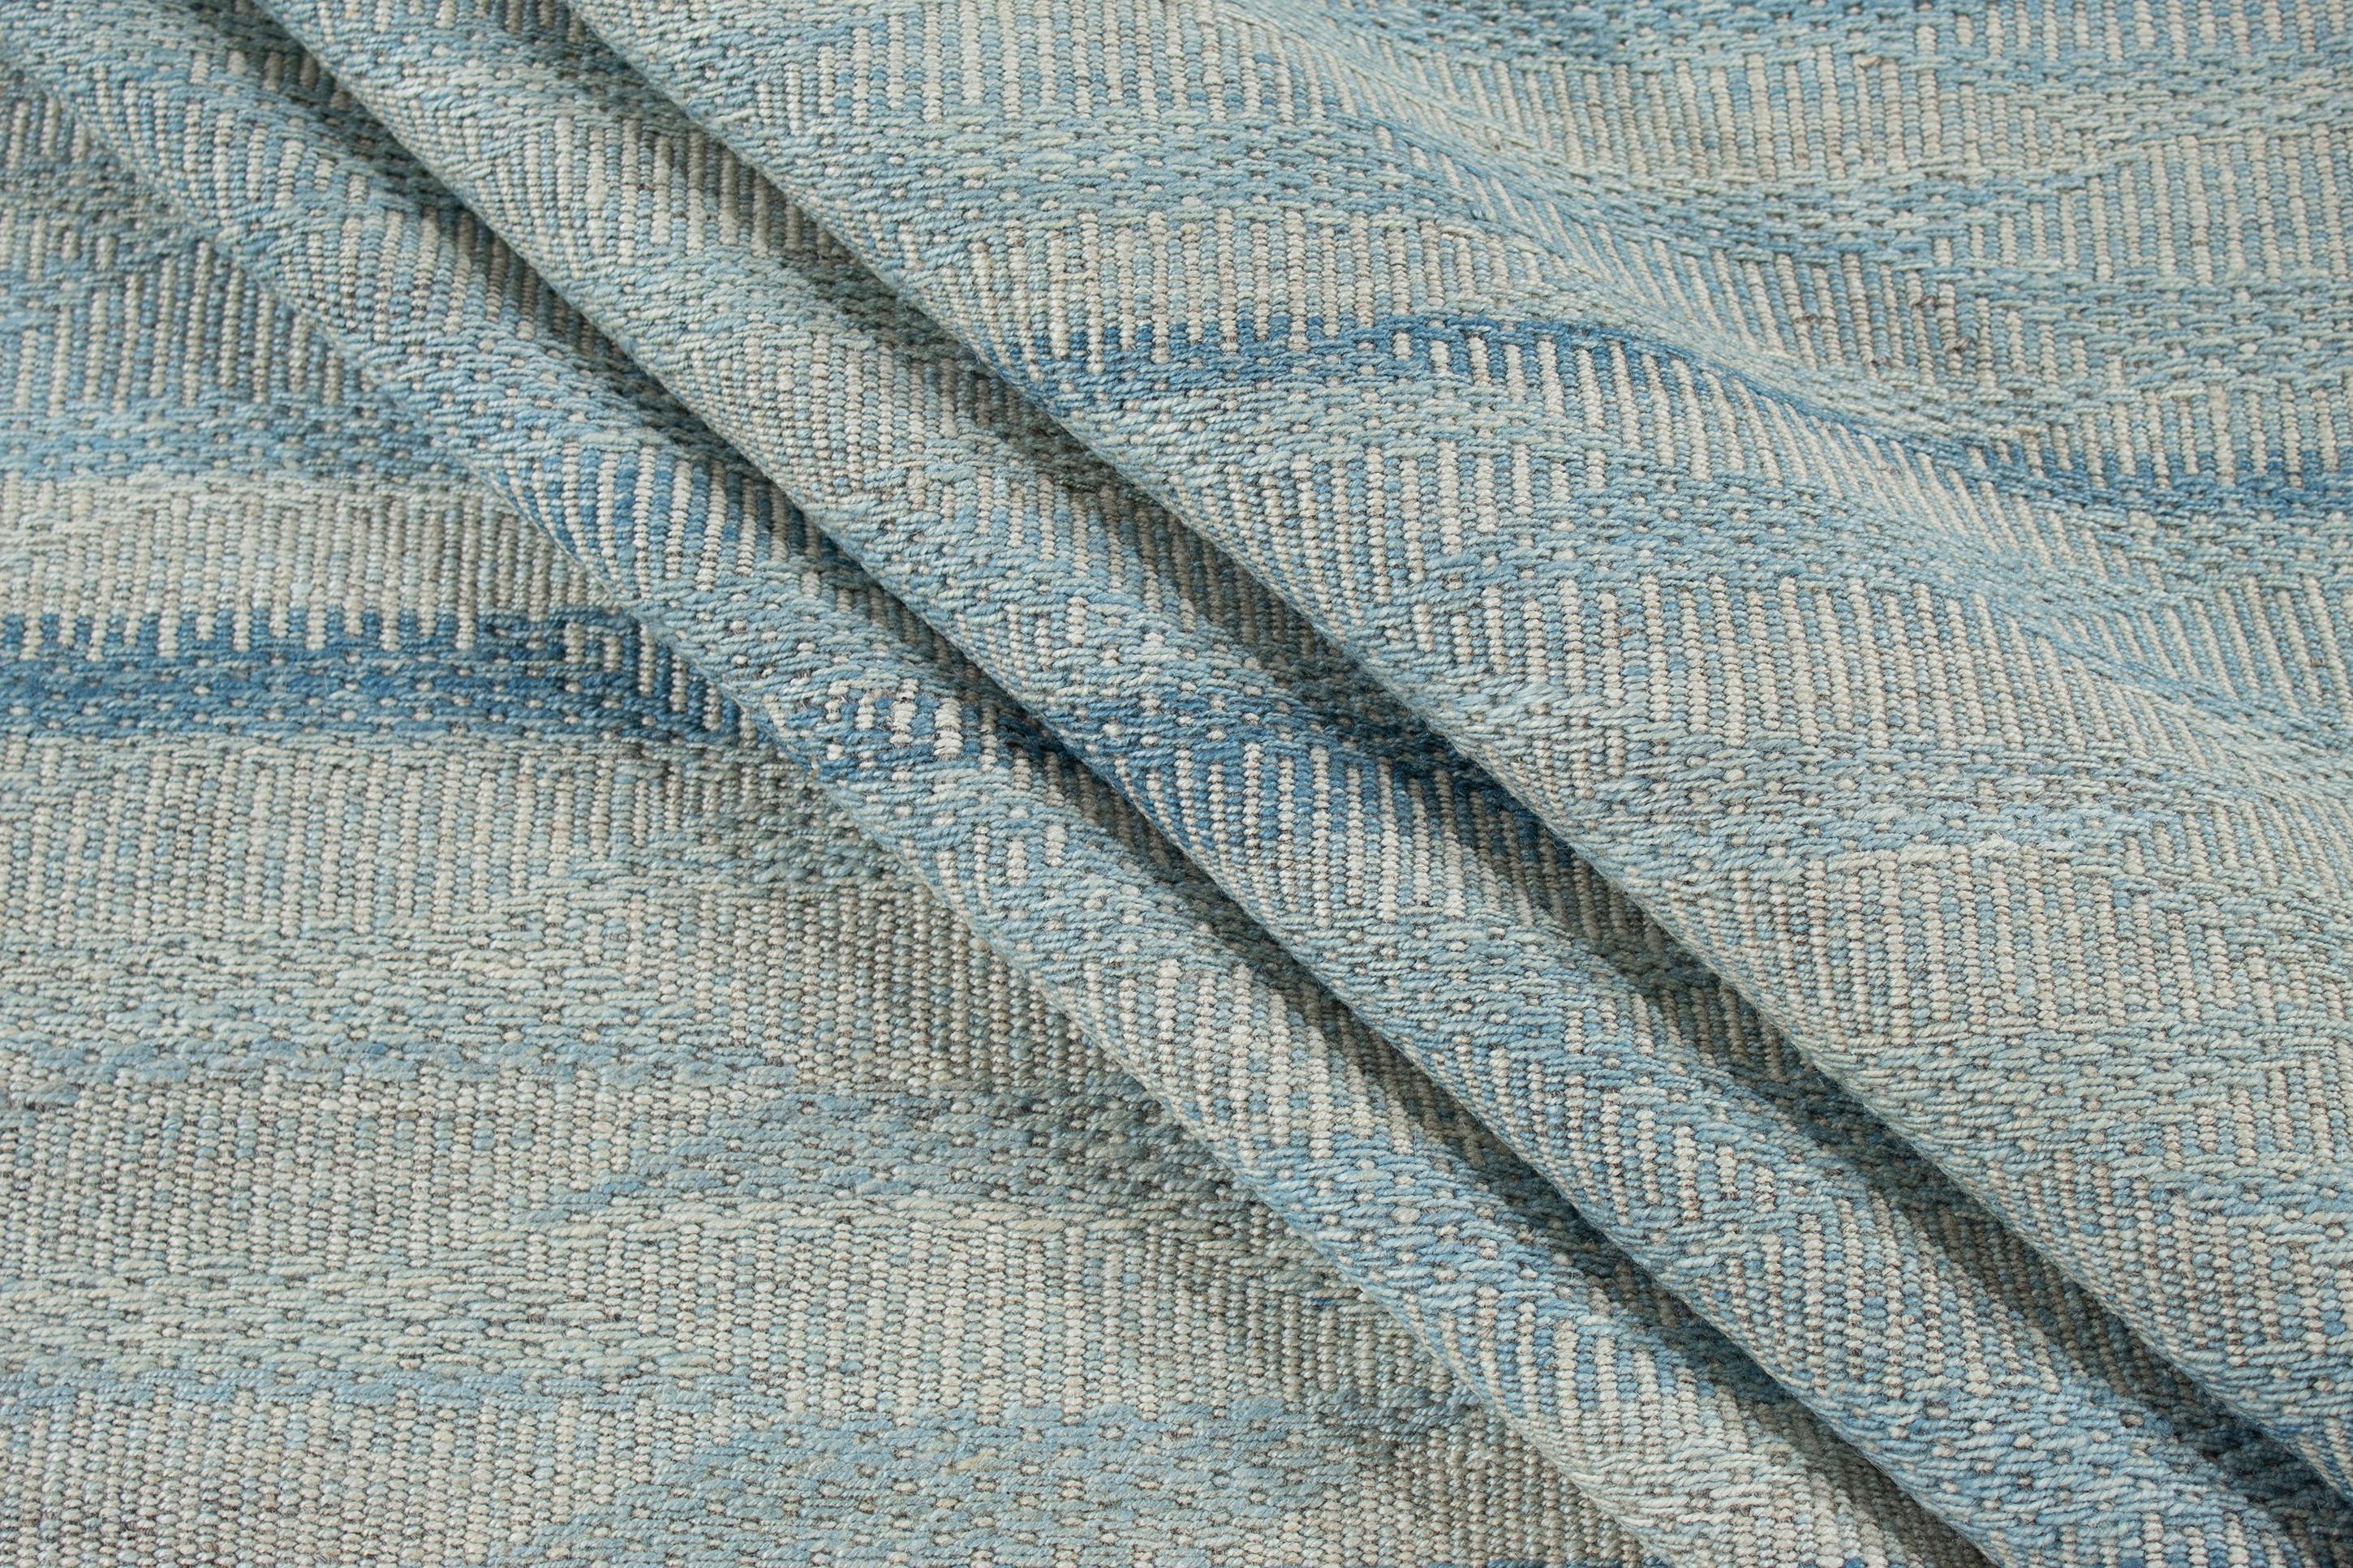 Hand-Woven Modern Unique Handwoven Textured Flat-Weave Rug in Shades of Blue For Sale